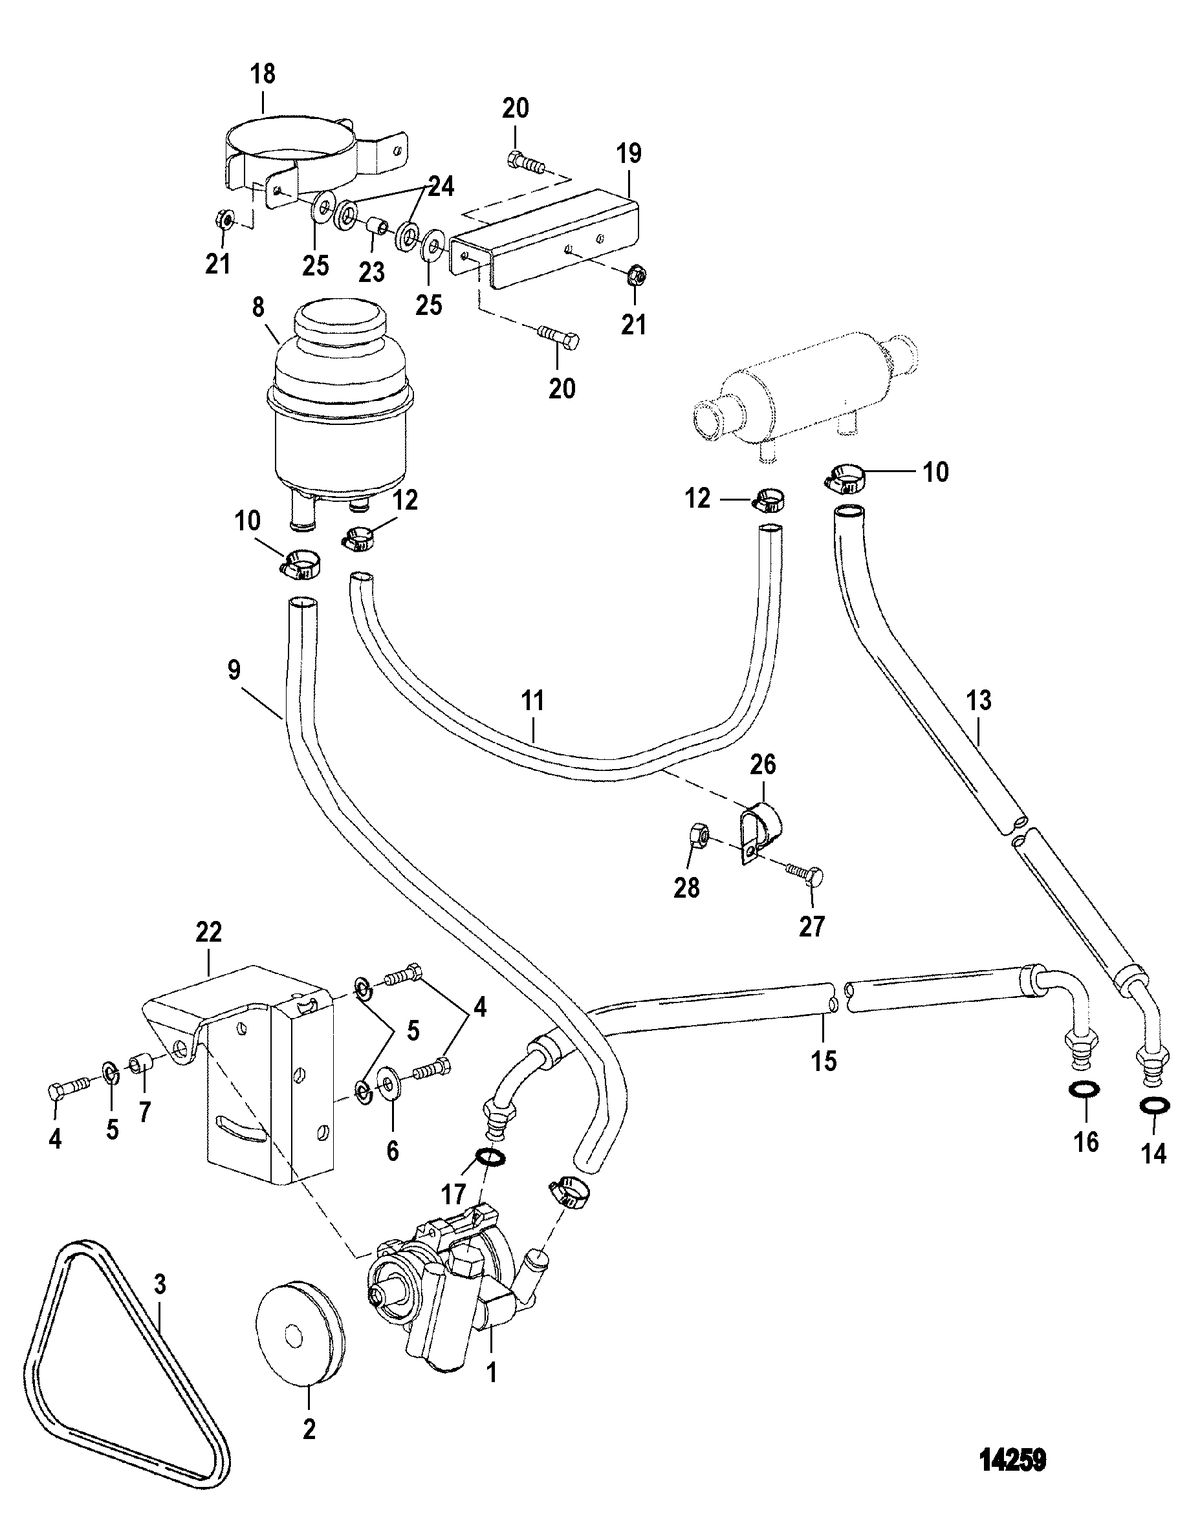 MERCRUISER D4.2L/200-LD POWER STEERING COMPONENTS(STERN DRIVE)